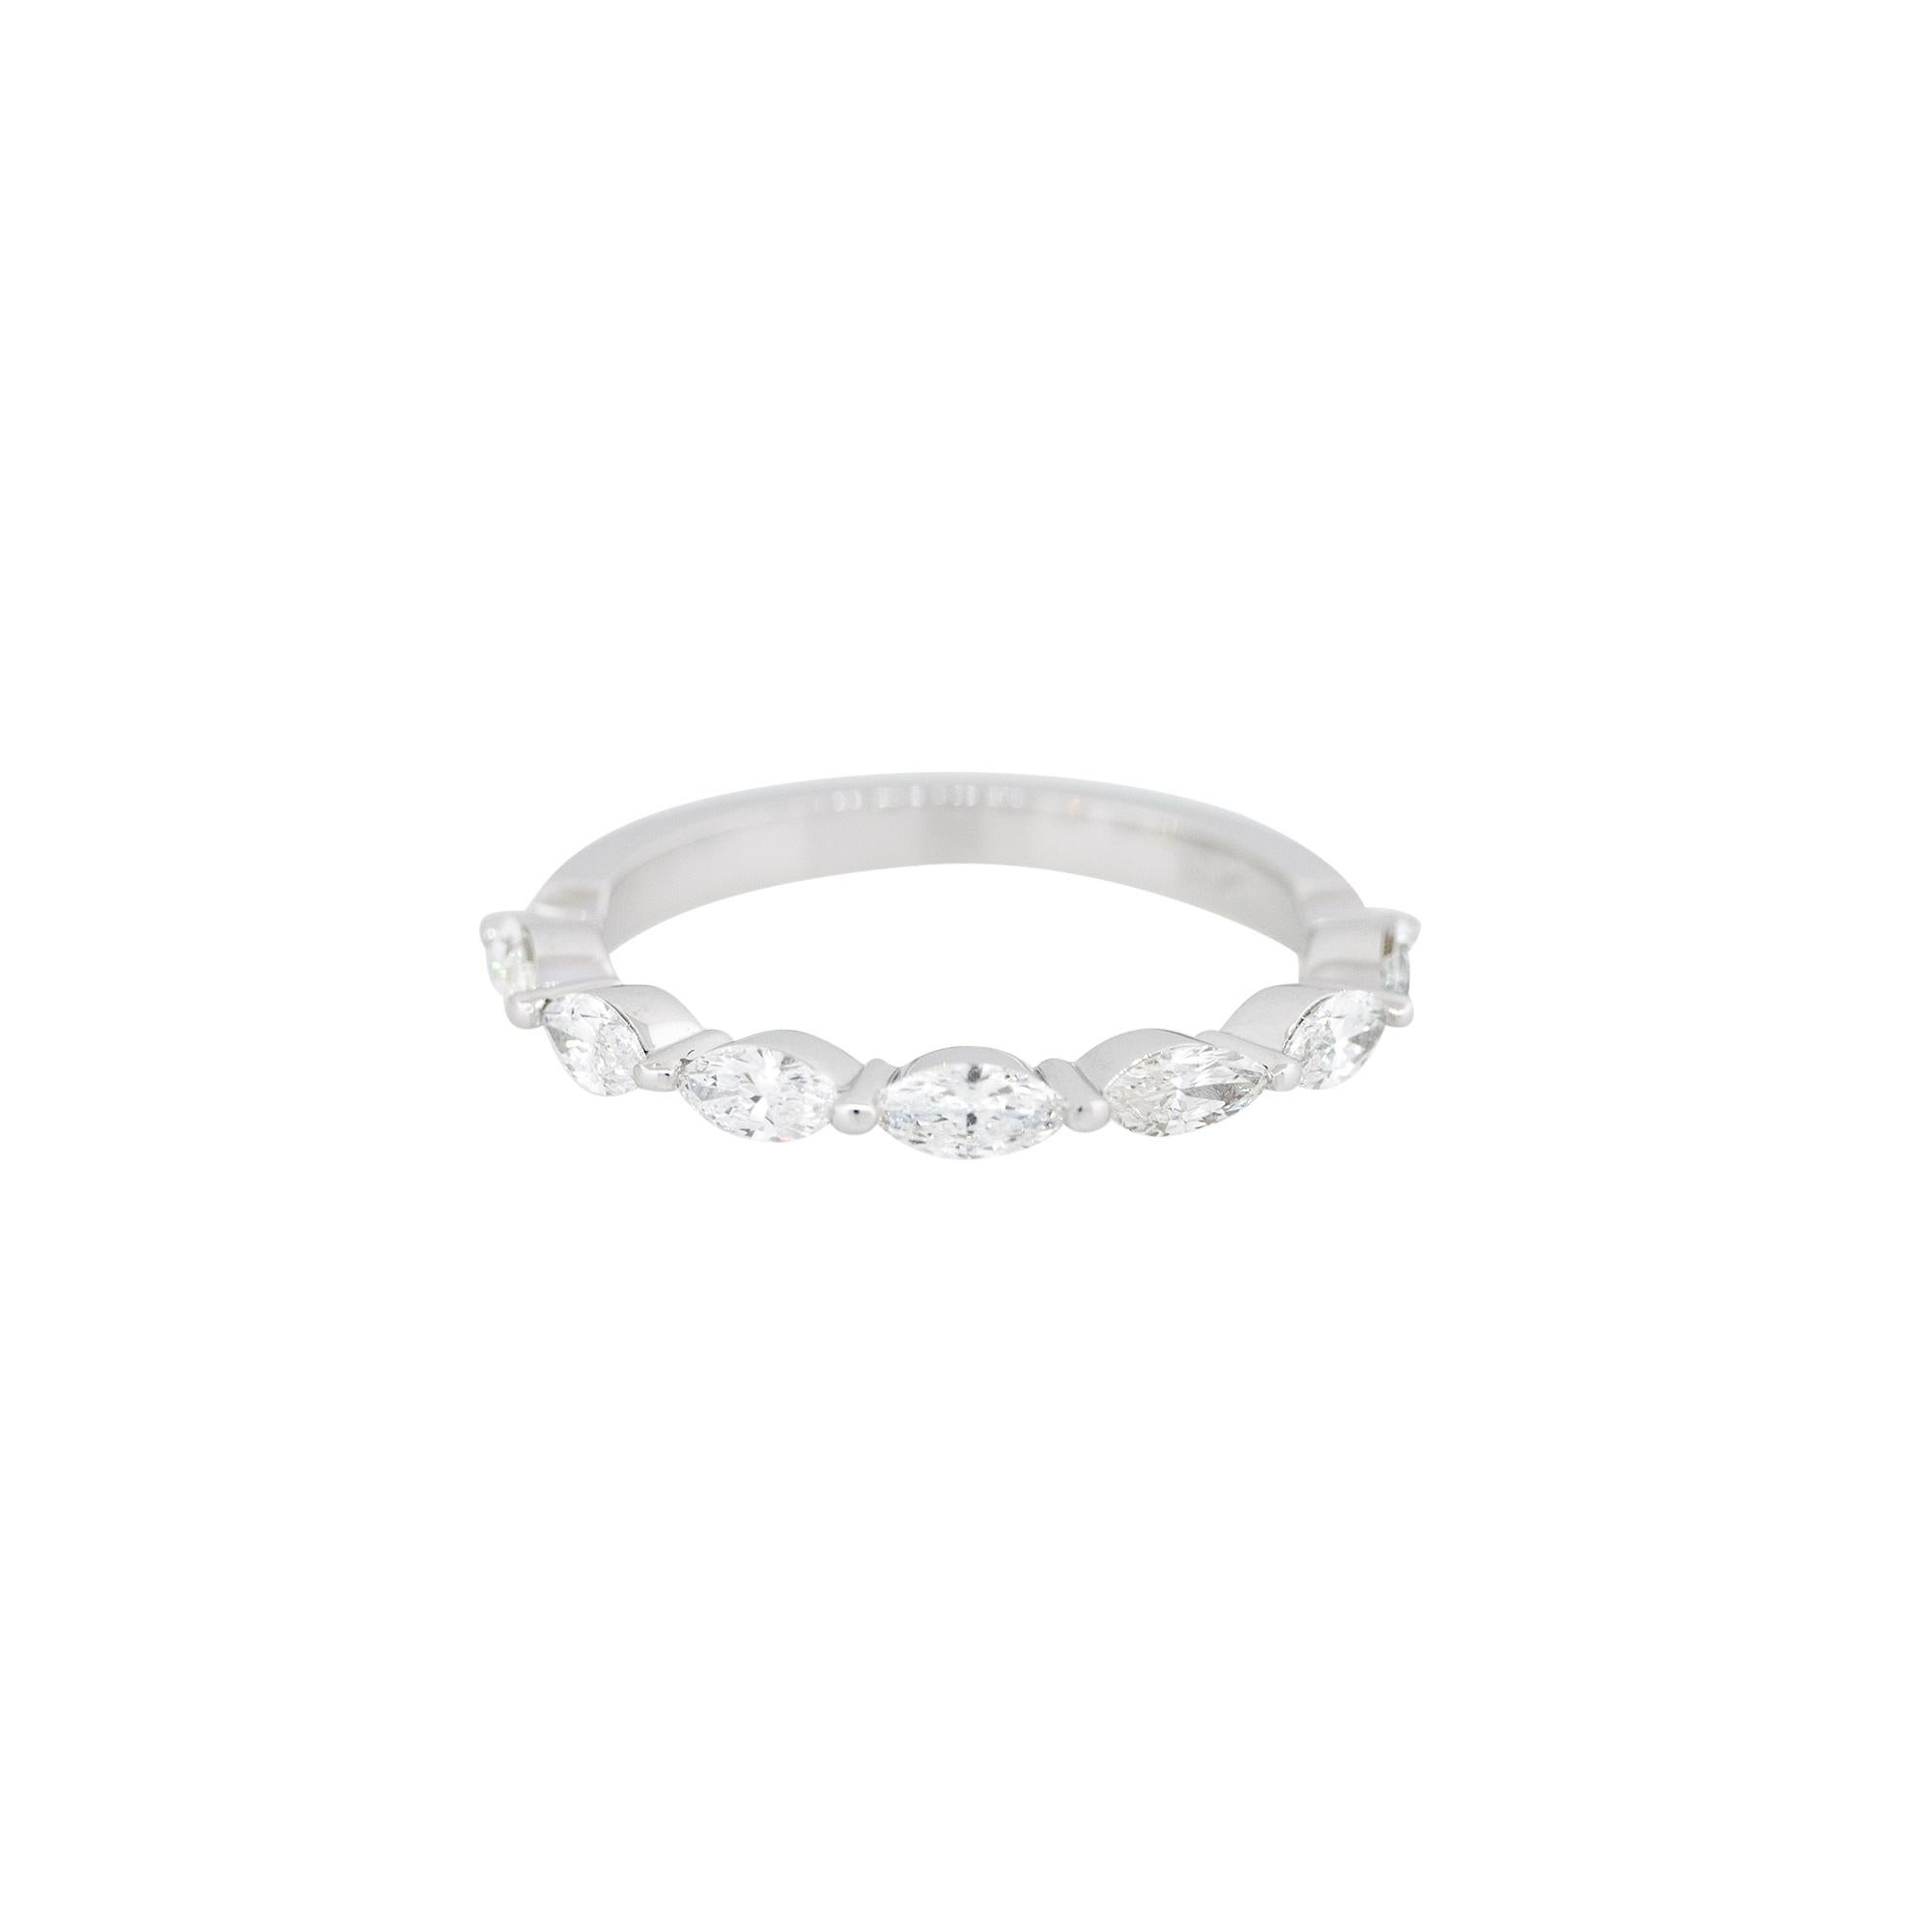 14k White Gold 0.75ctw Marquise Cut Diamond Half Way Band
Material: 14k White Gold
Diamond Details: Approximately 0.75ctw of Marquise Cut Diamonds. There are 7 stones total and all diamonds are approximately G/H in color and approximately VS/SI in